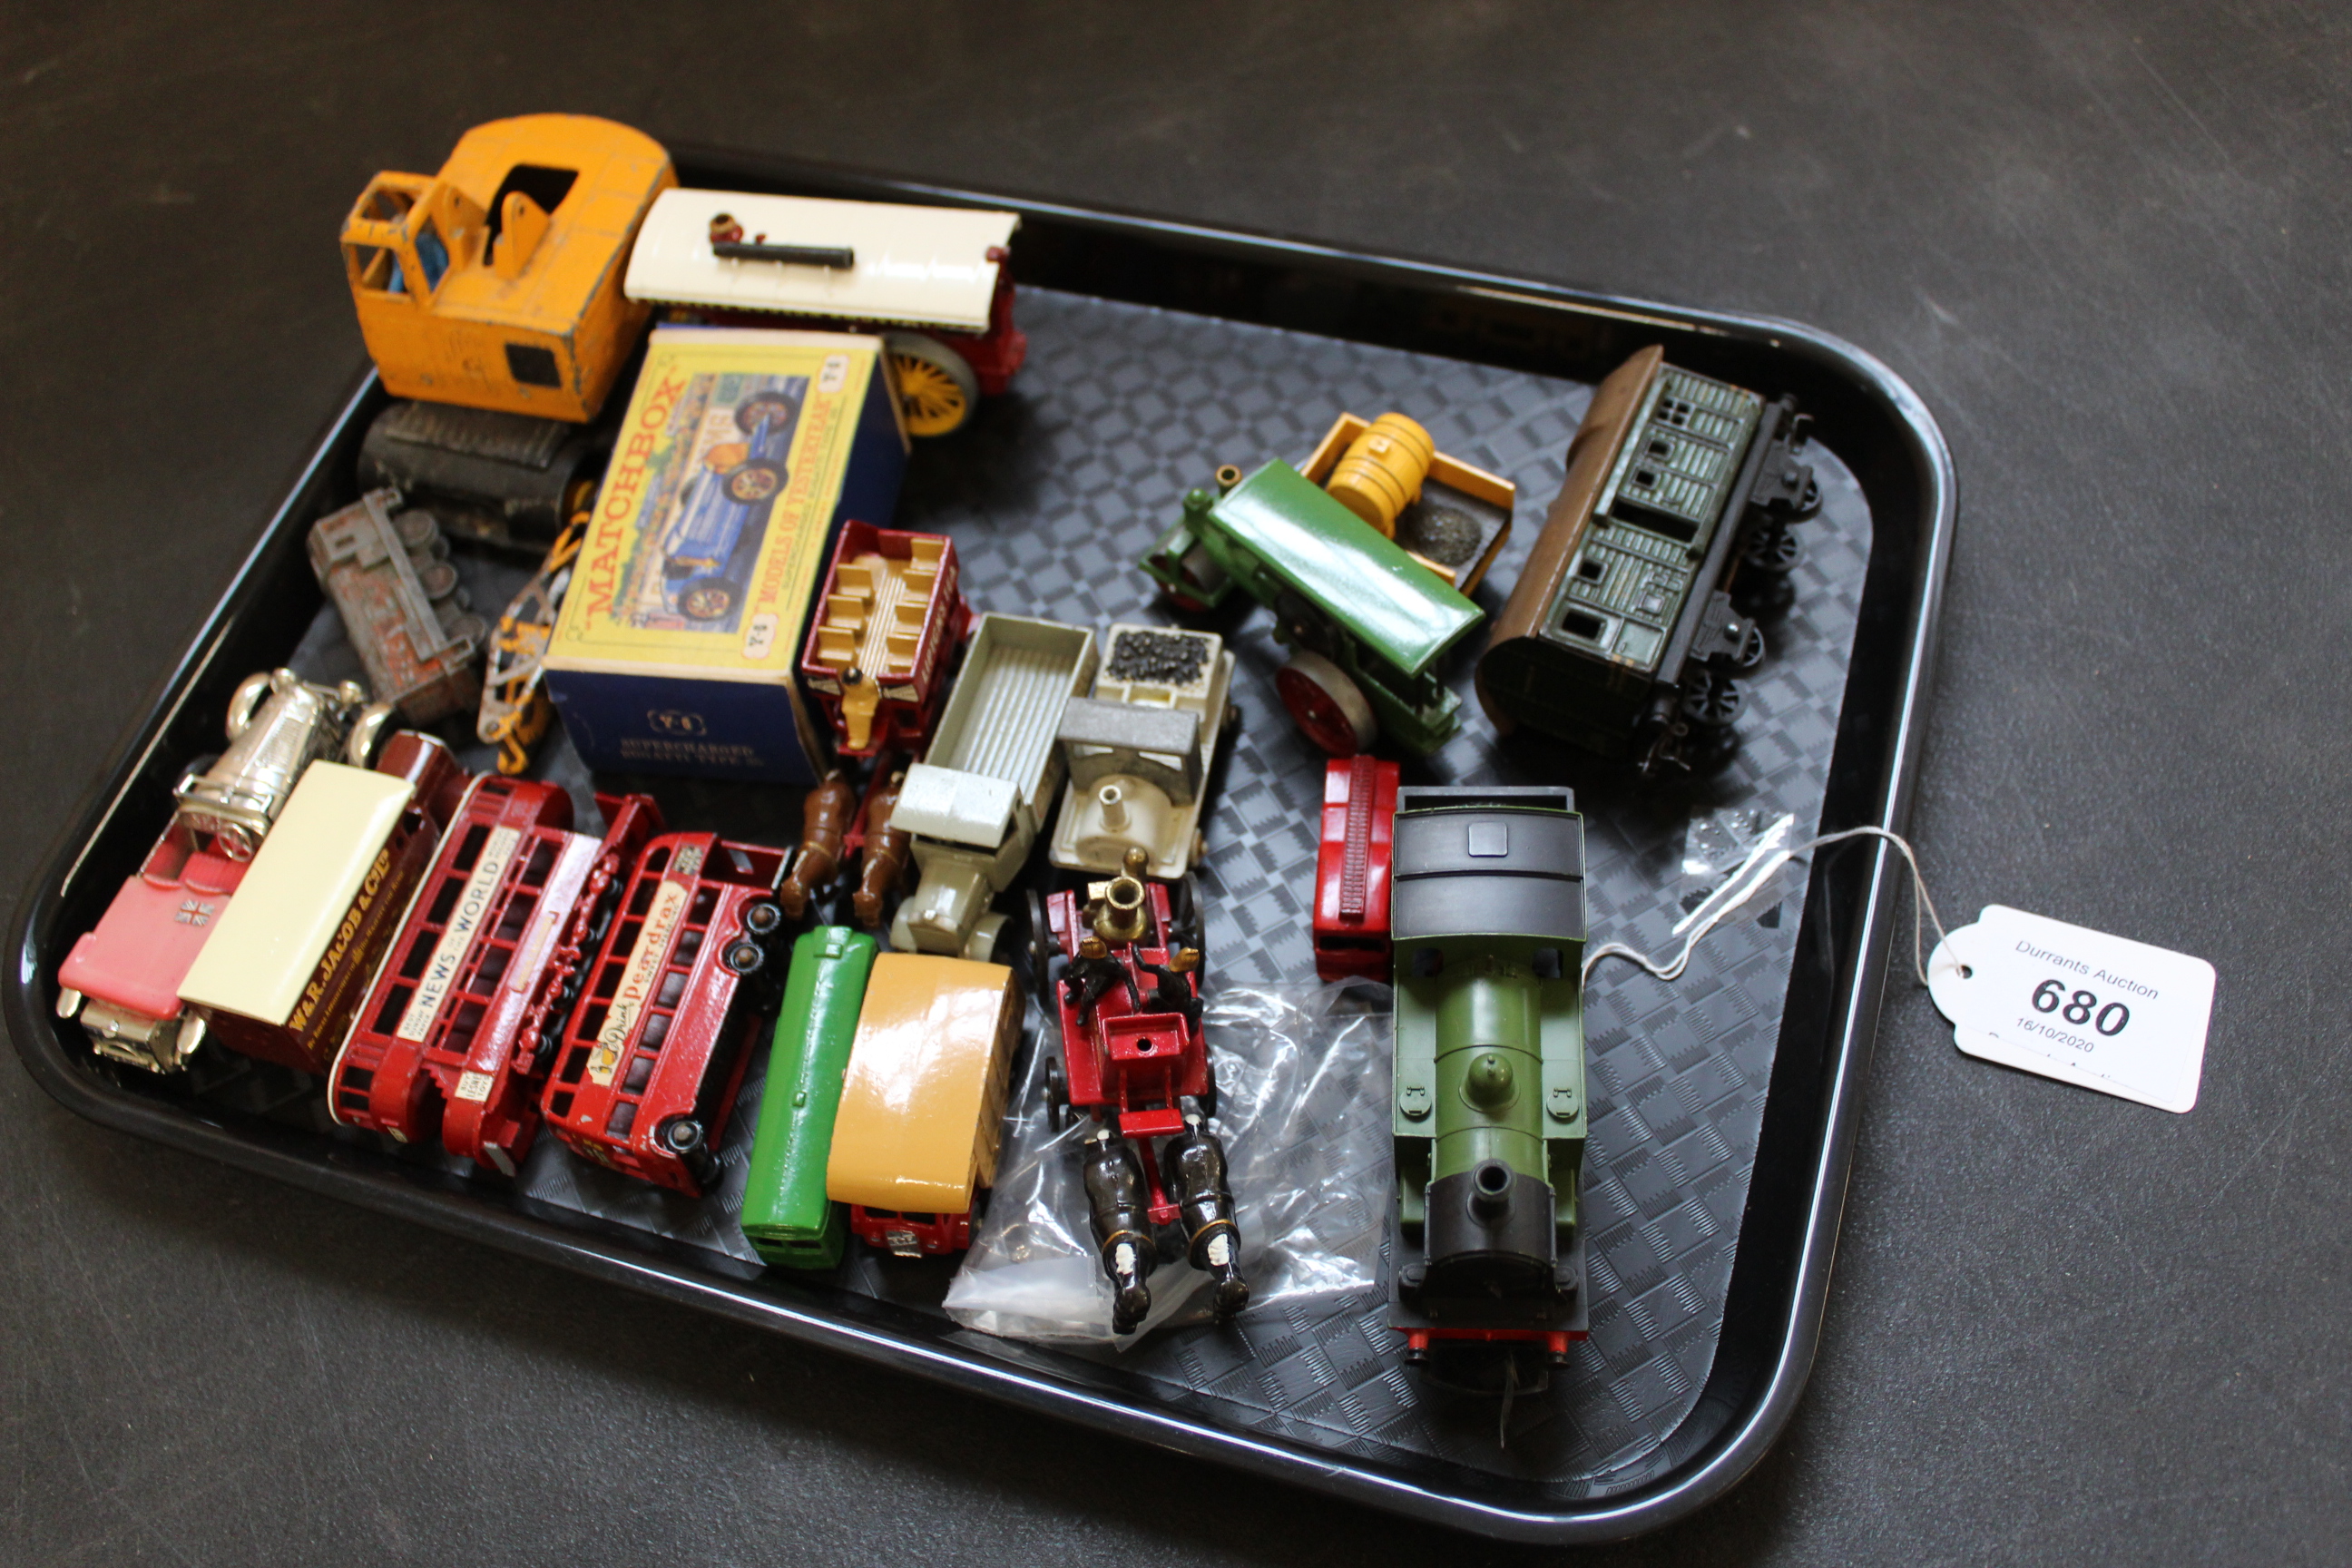 A tray with a selection of vintage tin plate cars, trains and carriages, Dinky, Matchbox,